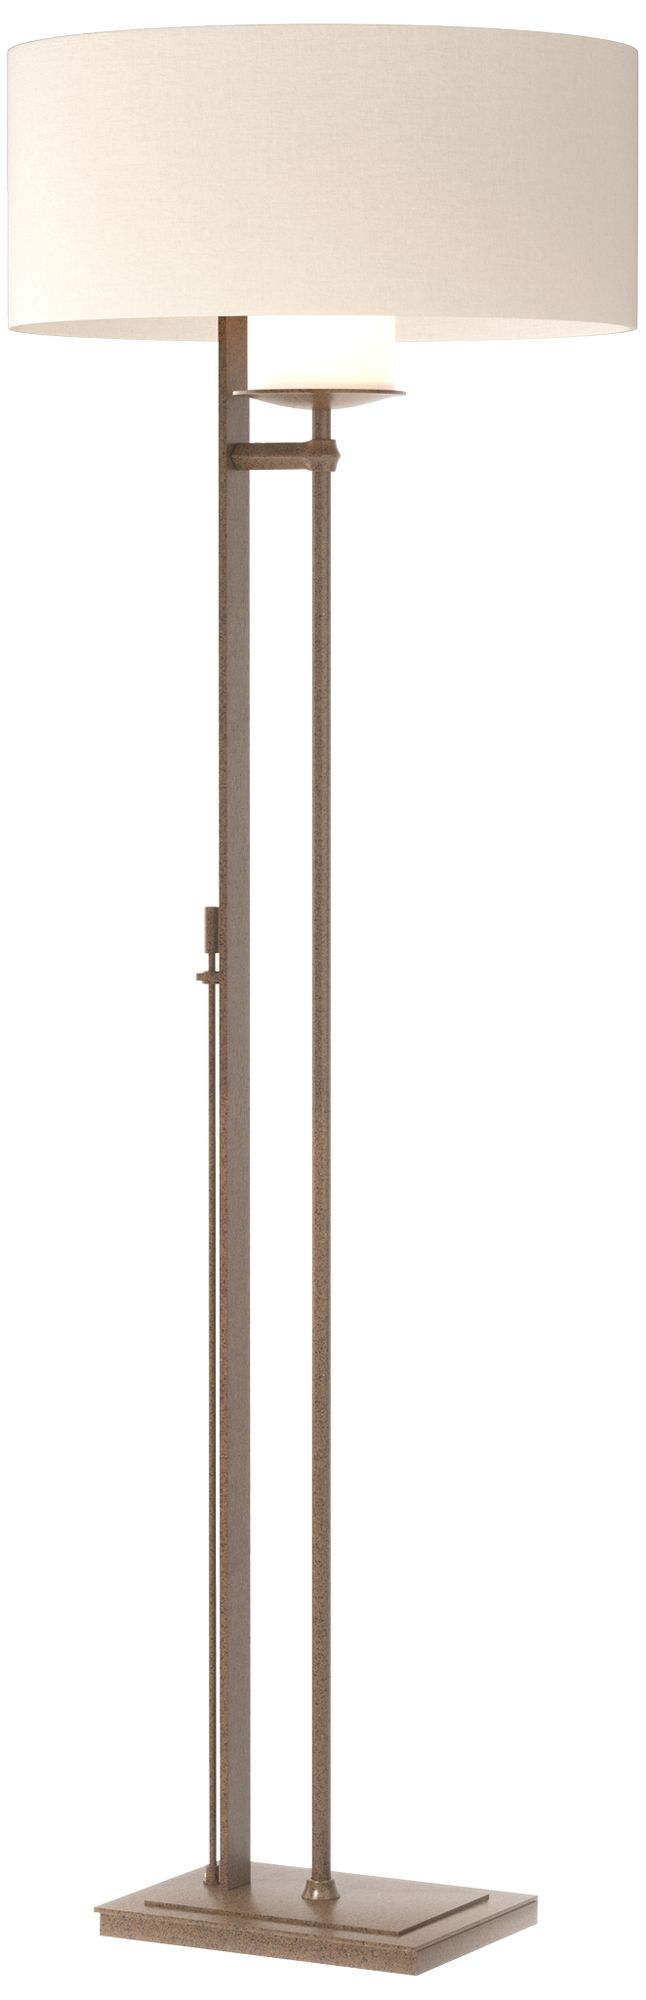 Rook 60" High Bronze Floor Lamp With Flax Shade